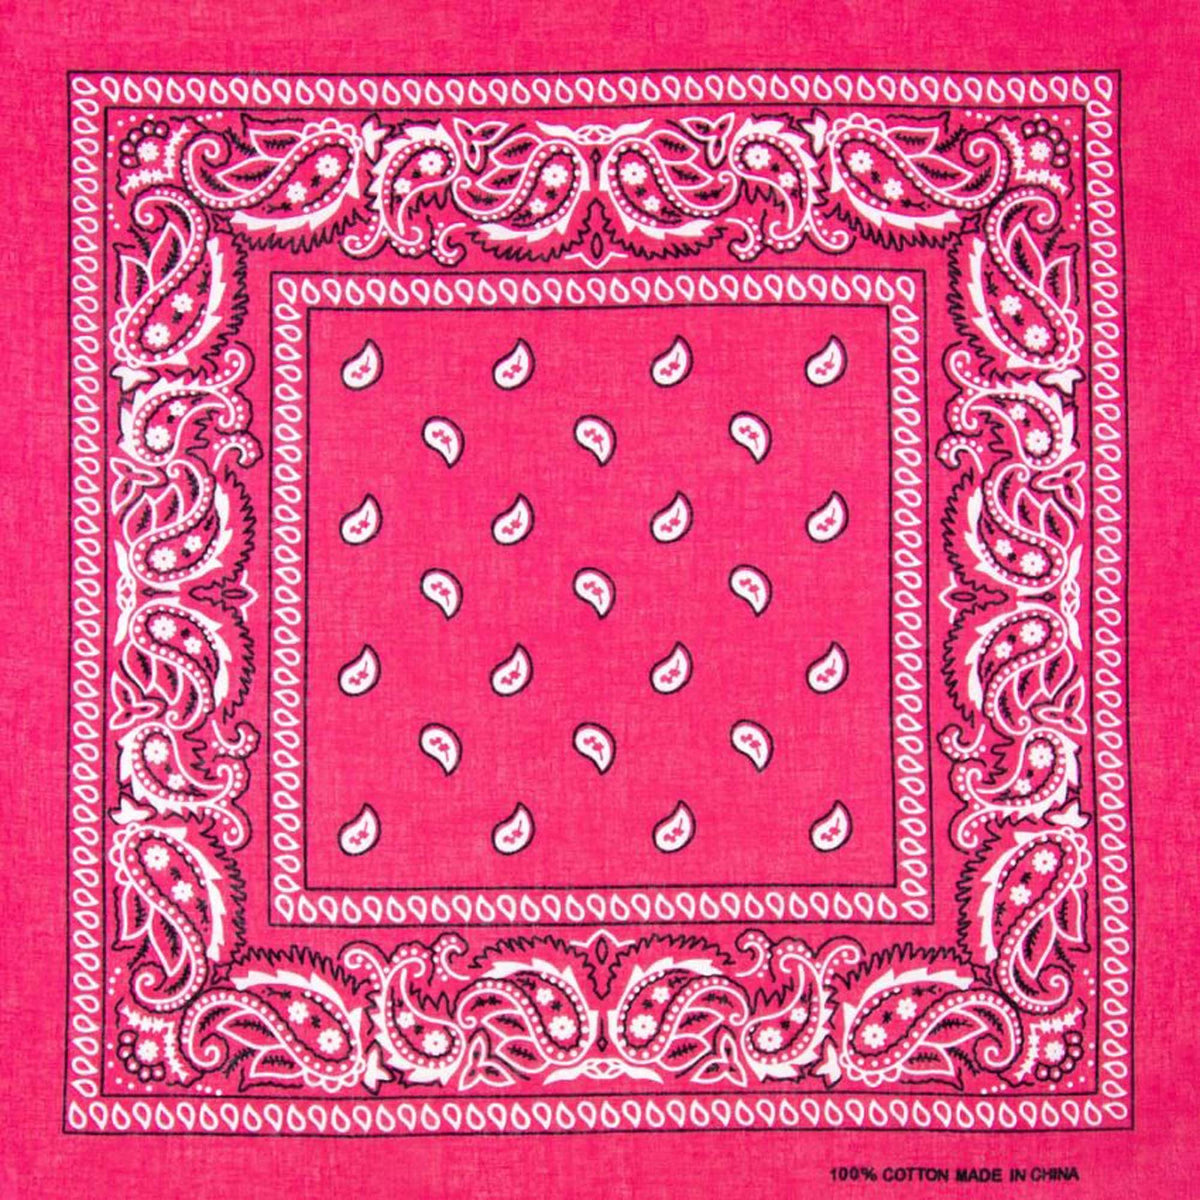 BUY4STORE Costumes Accessories Pink Bandana, 1 Count 810077659991